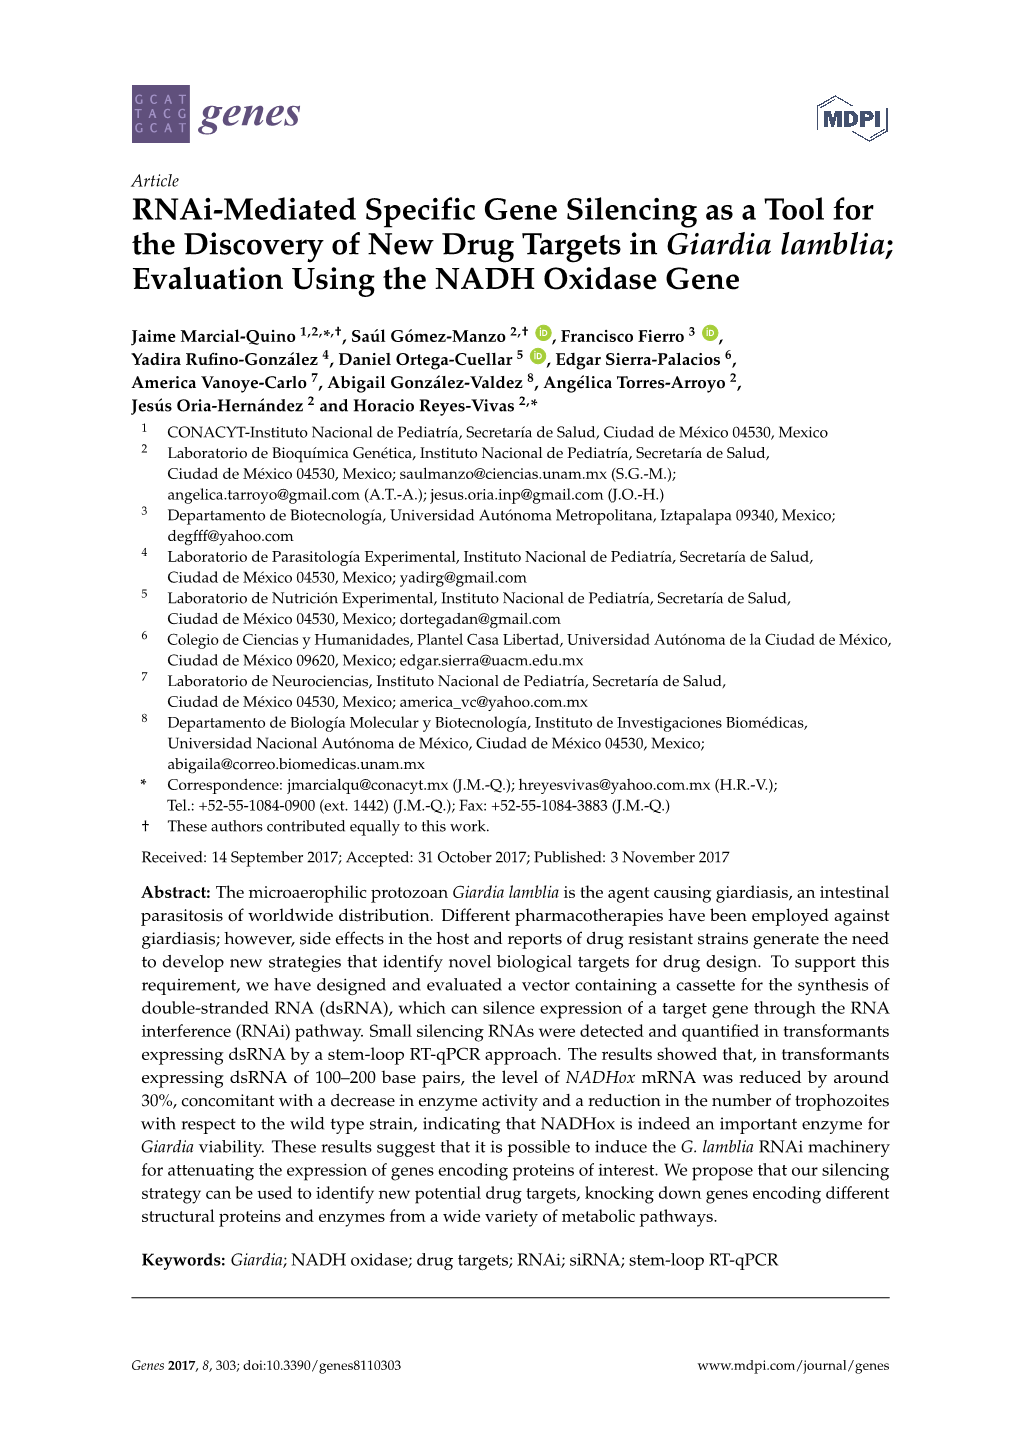 Rnai-Mediated Specific Gene Silencing As a Tool for the Discovery of New Drug Targets in Giardia Lamblia; Evaluation Using the NADH Oxidase Gene